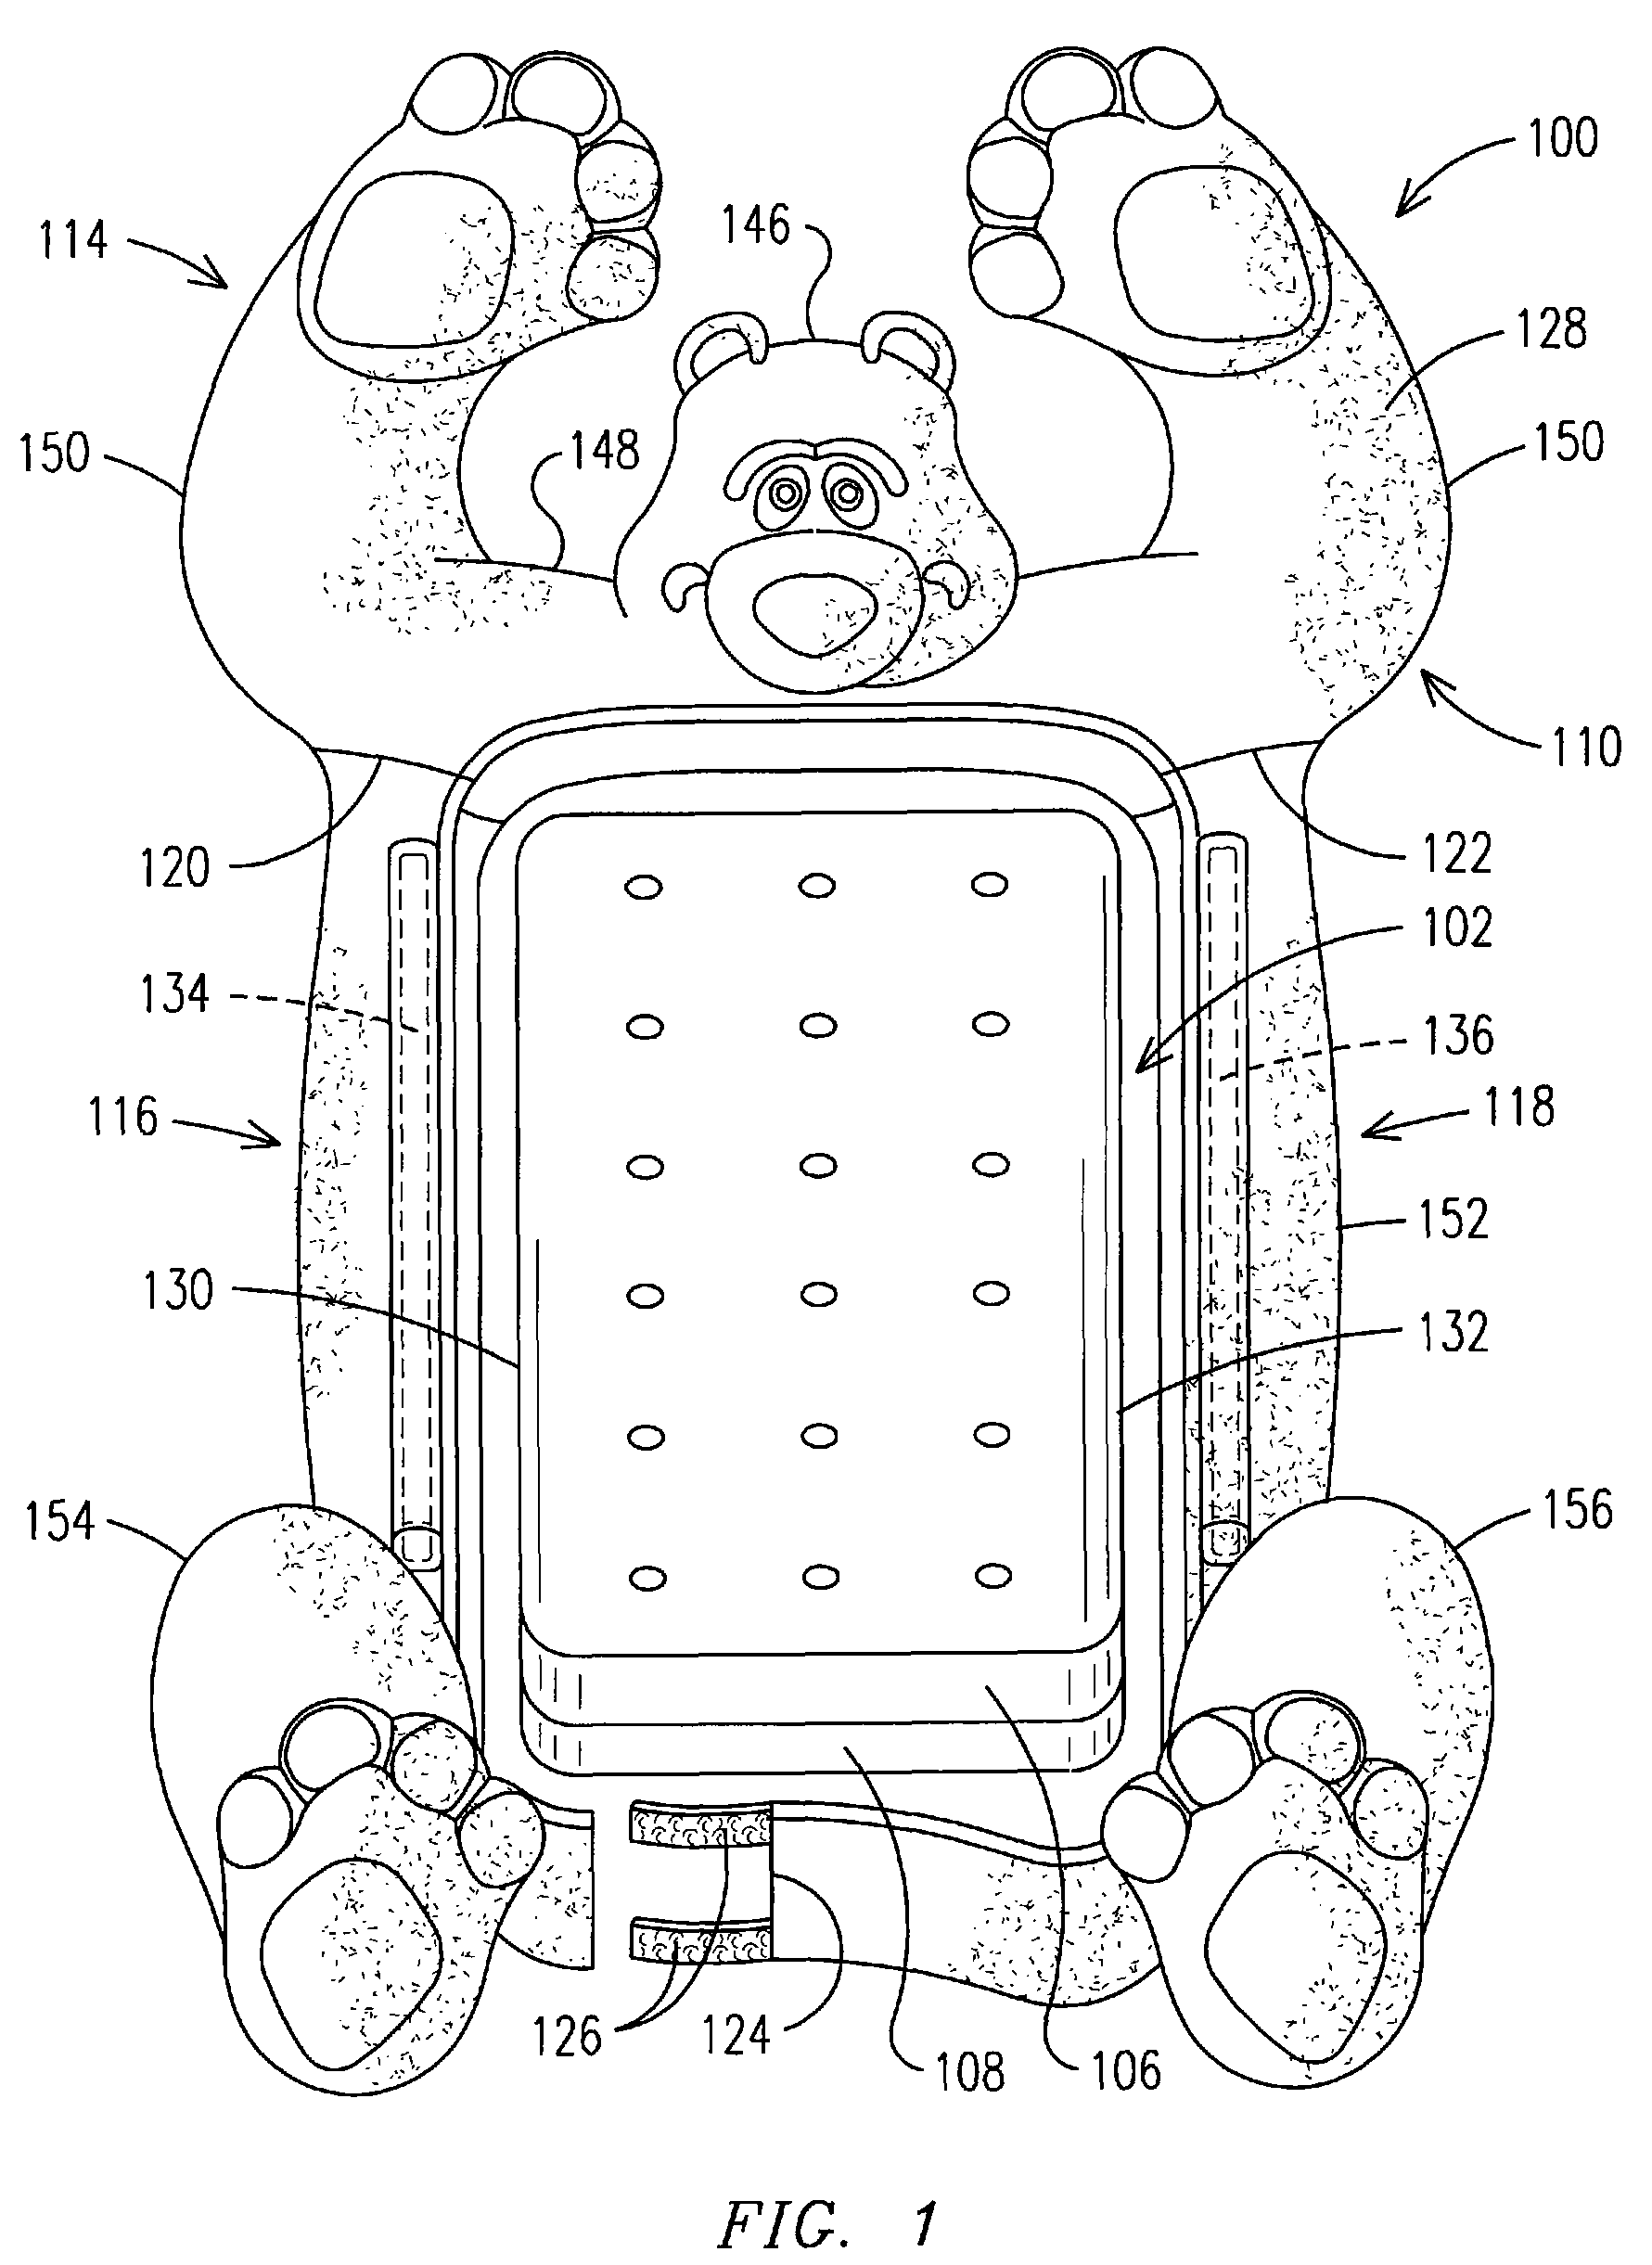 System and method for enhancing the safety of a sleeping arrangement for a child on a bed